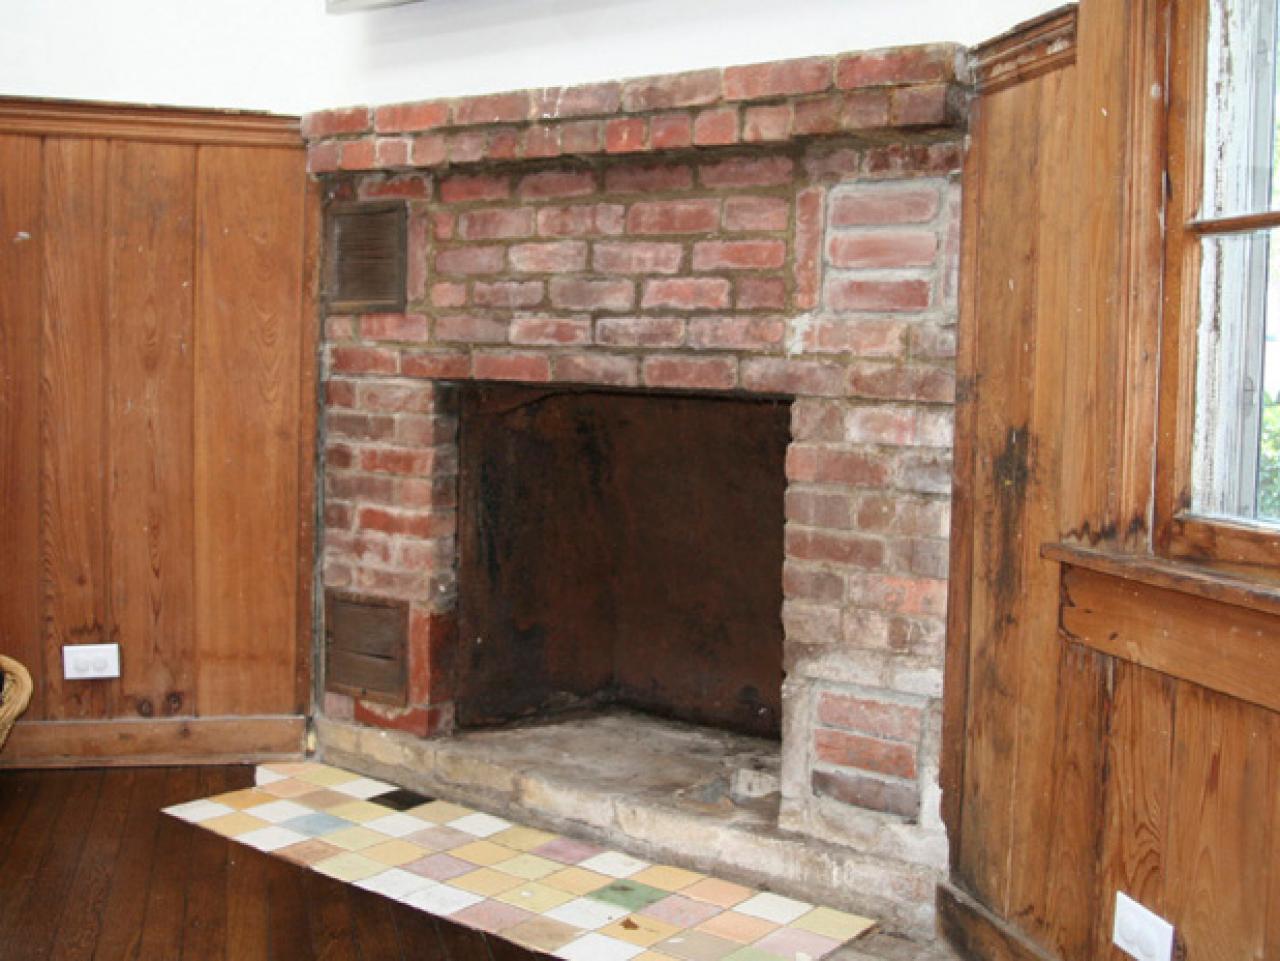 Brick Fireplace With Stone, How To Cover Up Old Brick Fireplace